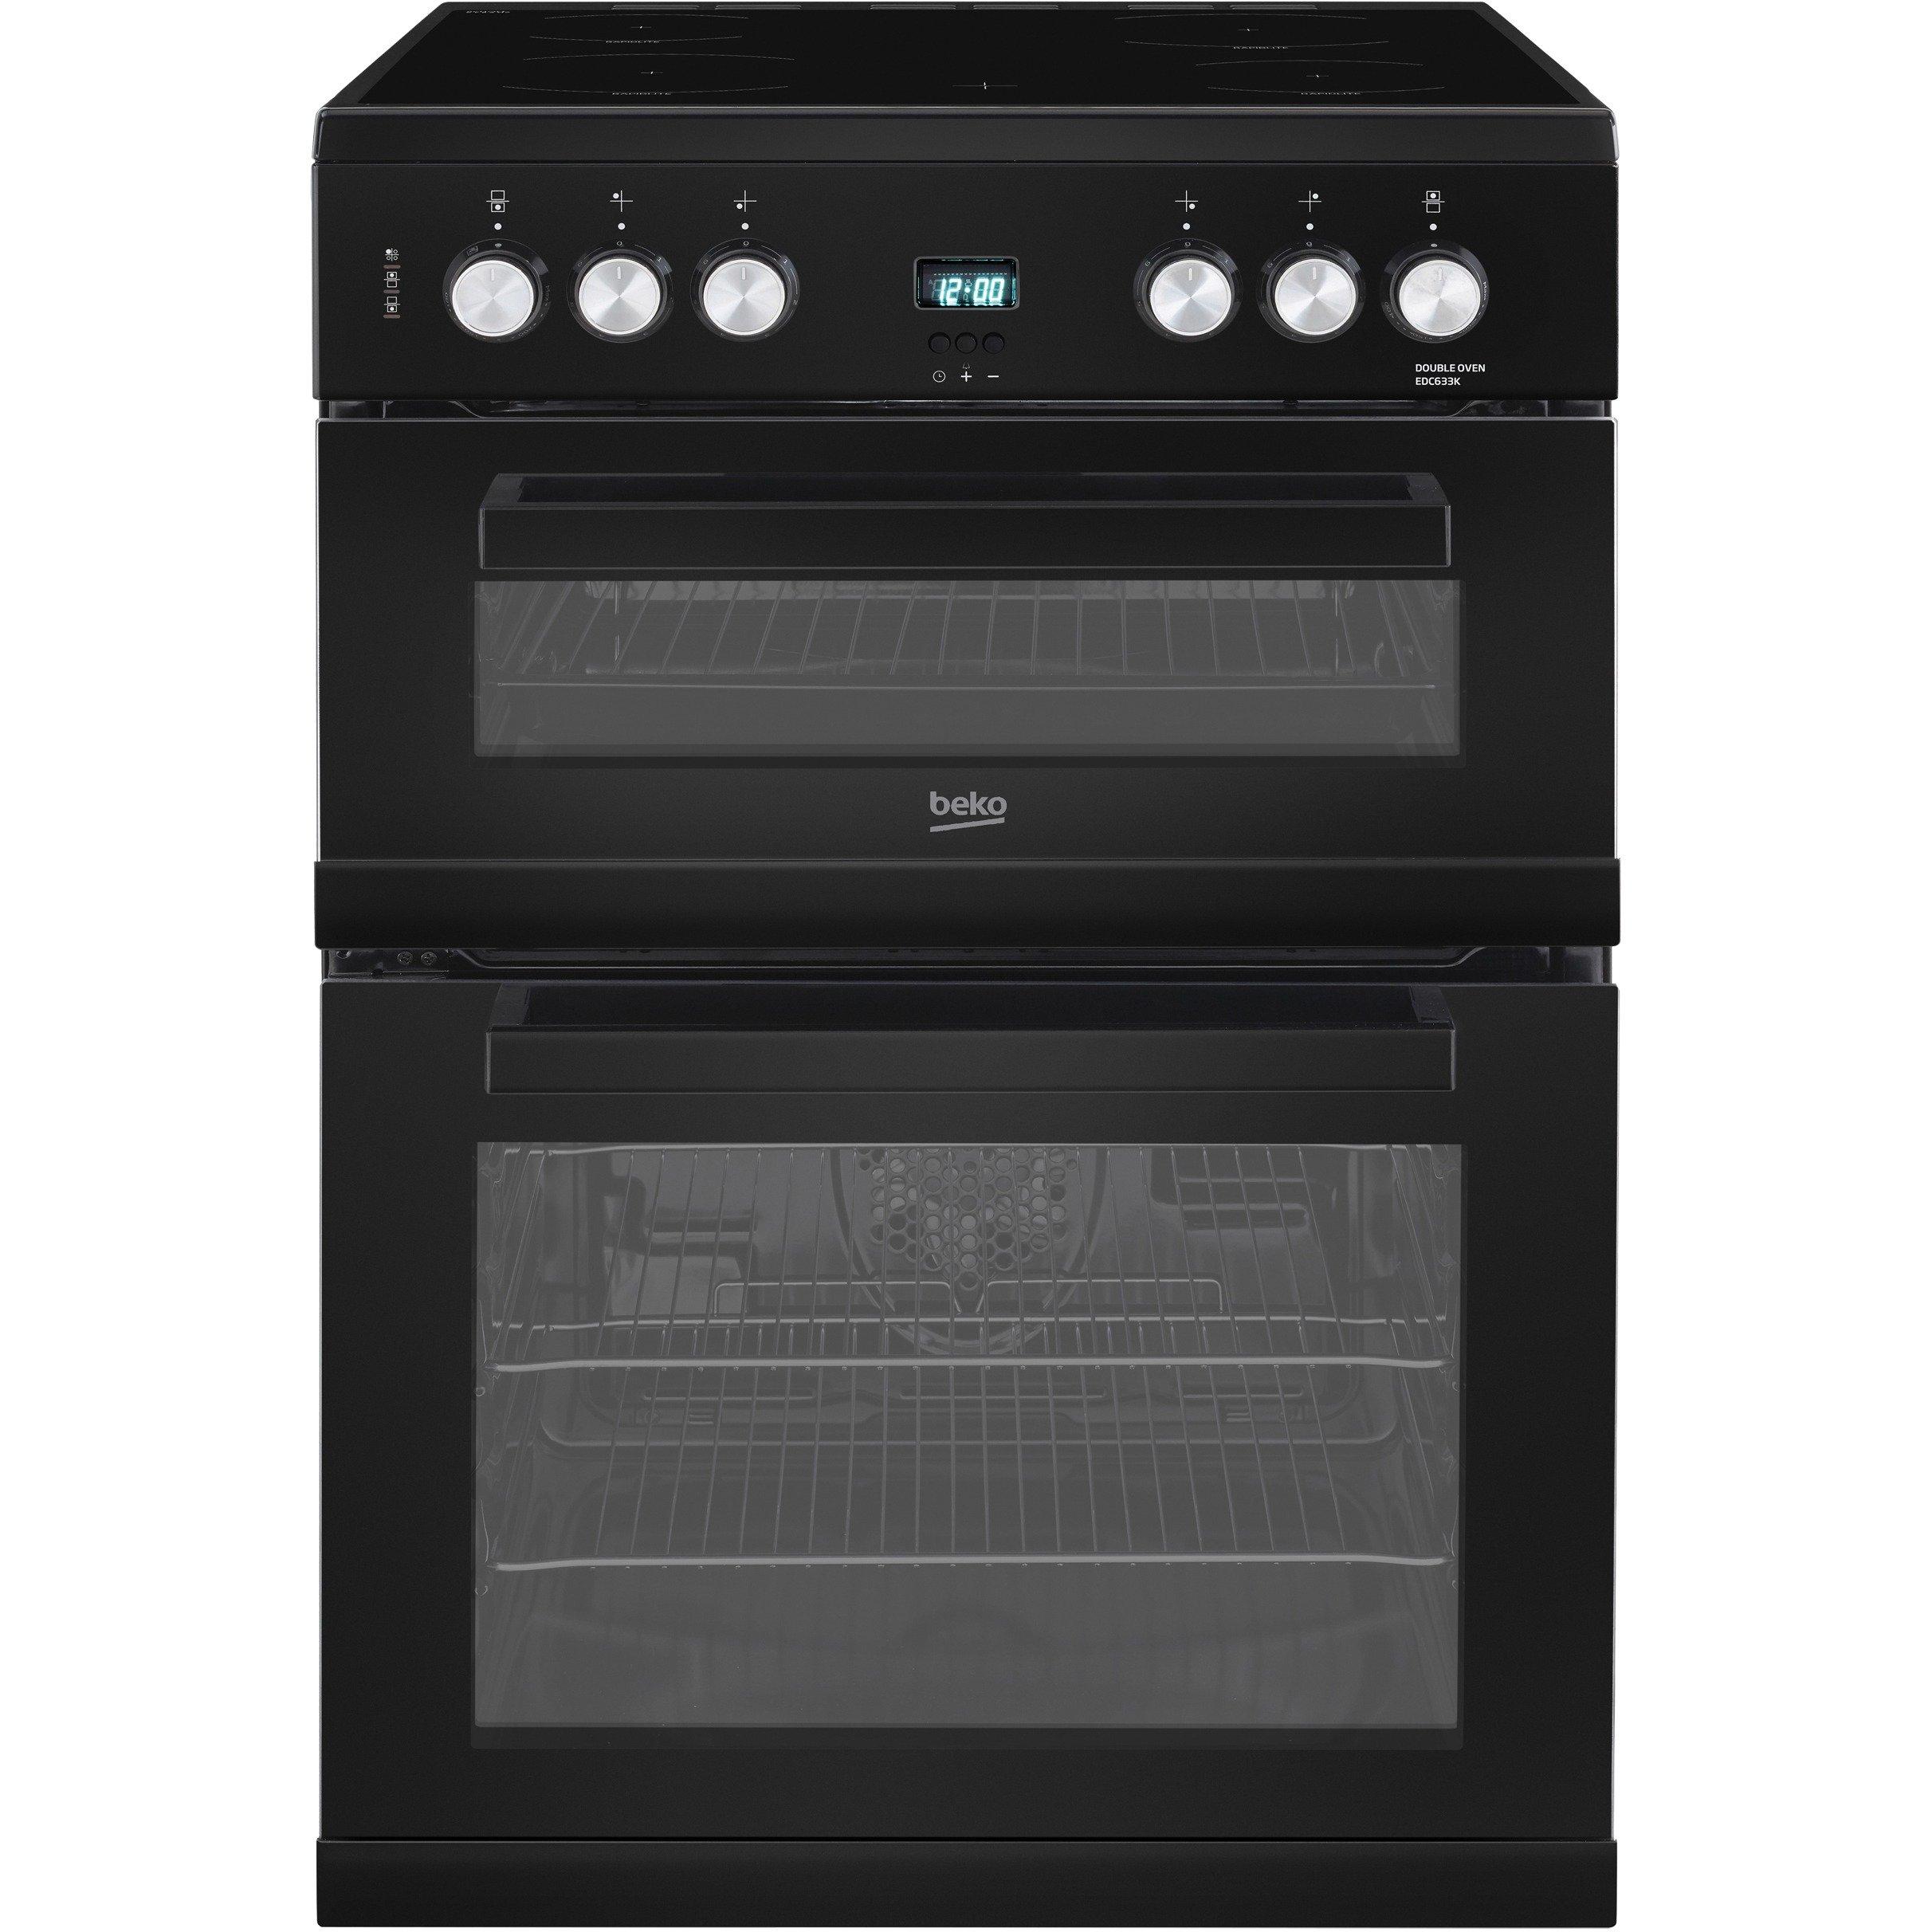 freestanding double oven electric cookers